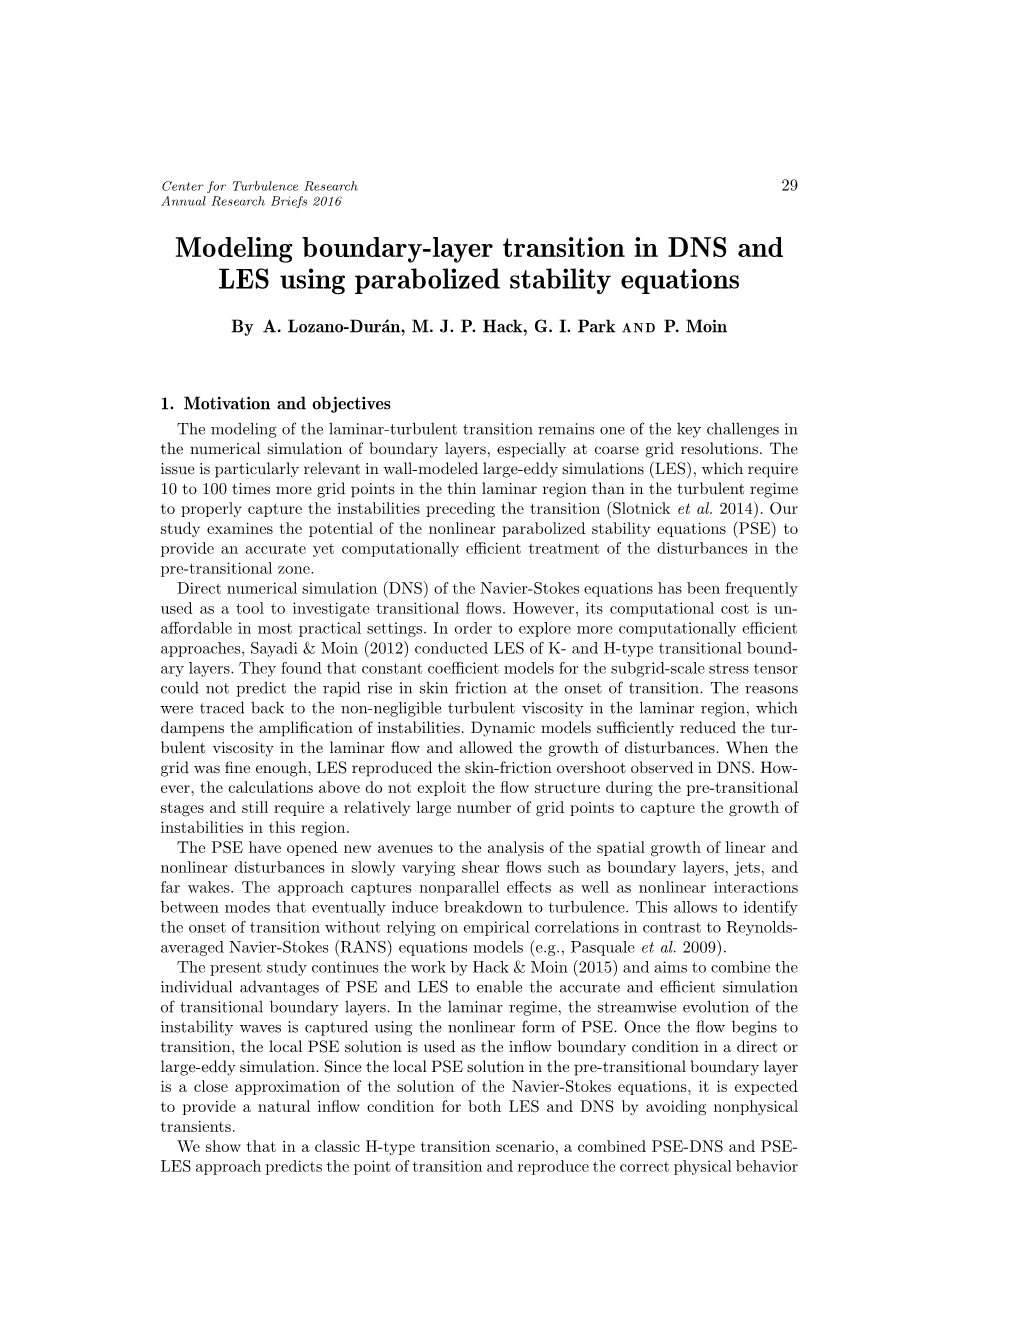 Modeling Boundary-Layer Transition in DNS and LES Using Parabolized Stability Equations